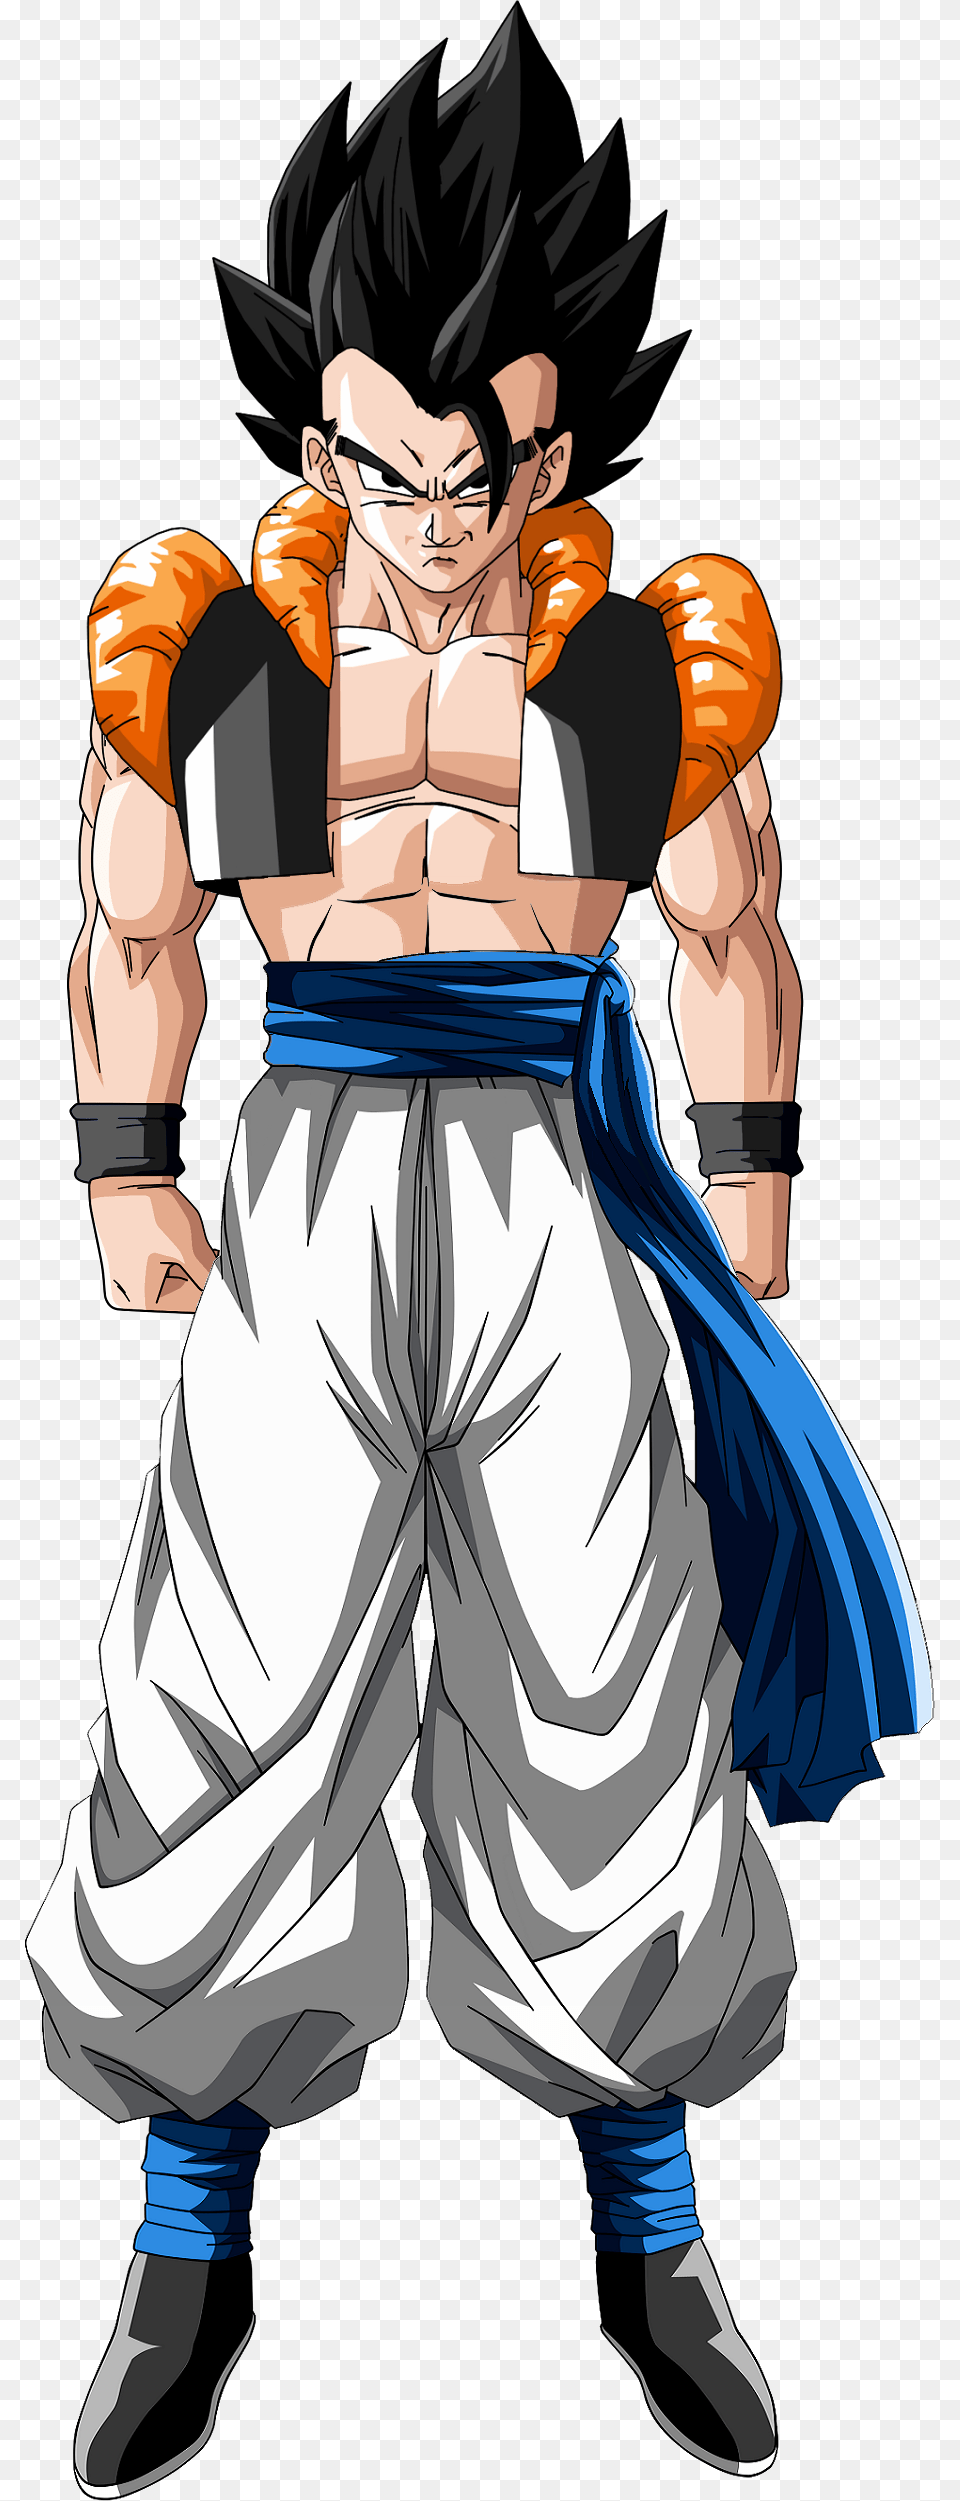 Happy Spooktober From Jbw Dragon Ball Fusion Meme, Book, Comics, Publication, Person Free Transparent Png